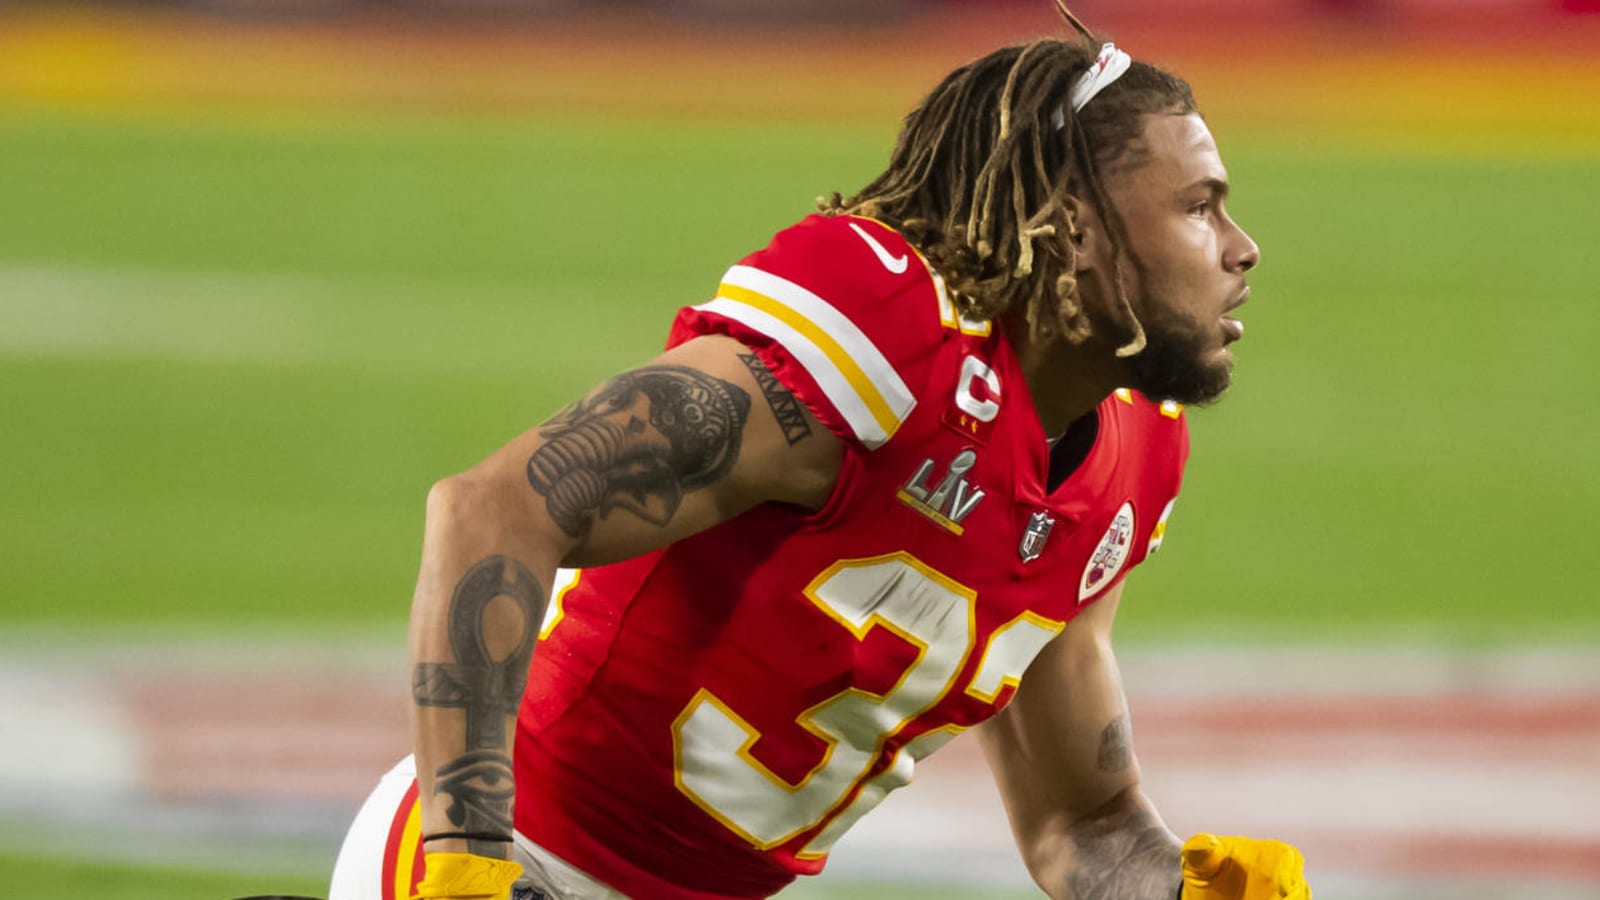 Chiefs GM: Team hopes Tyrann Mathieu for 'years to come'